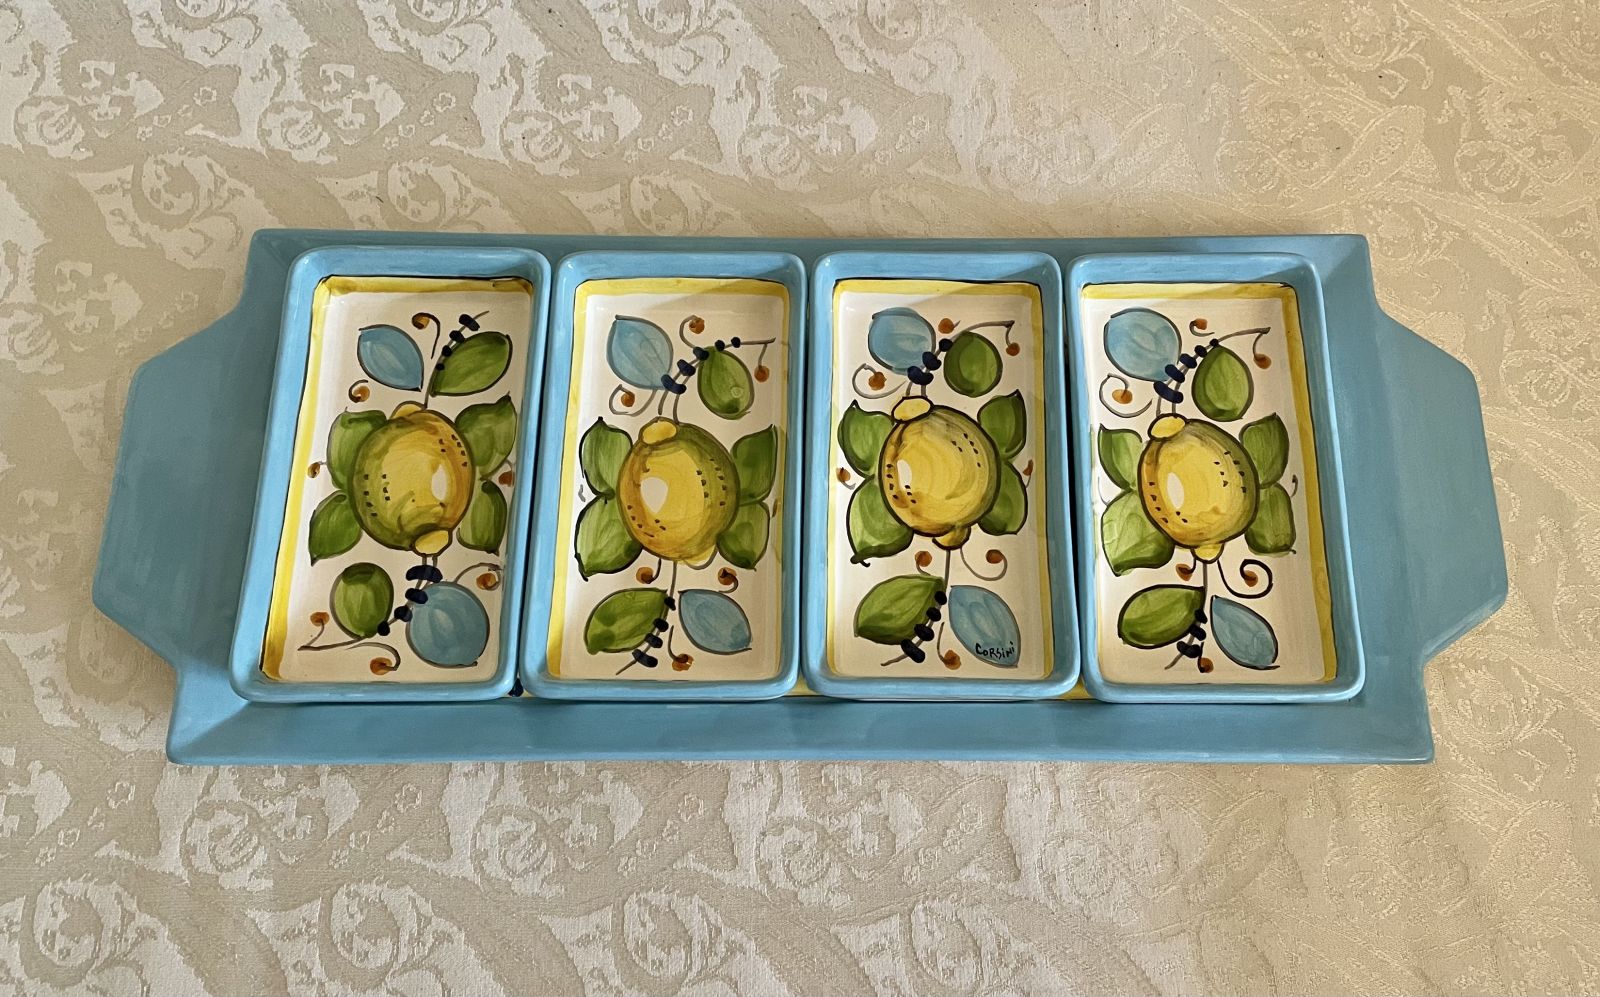 Rectangular hors d'oeuvre dish with tray and 4 small bowls 44x17 cm with lemons